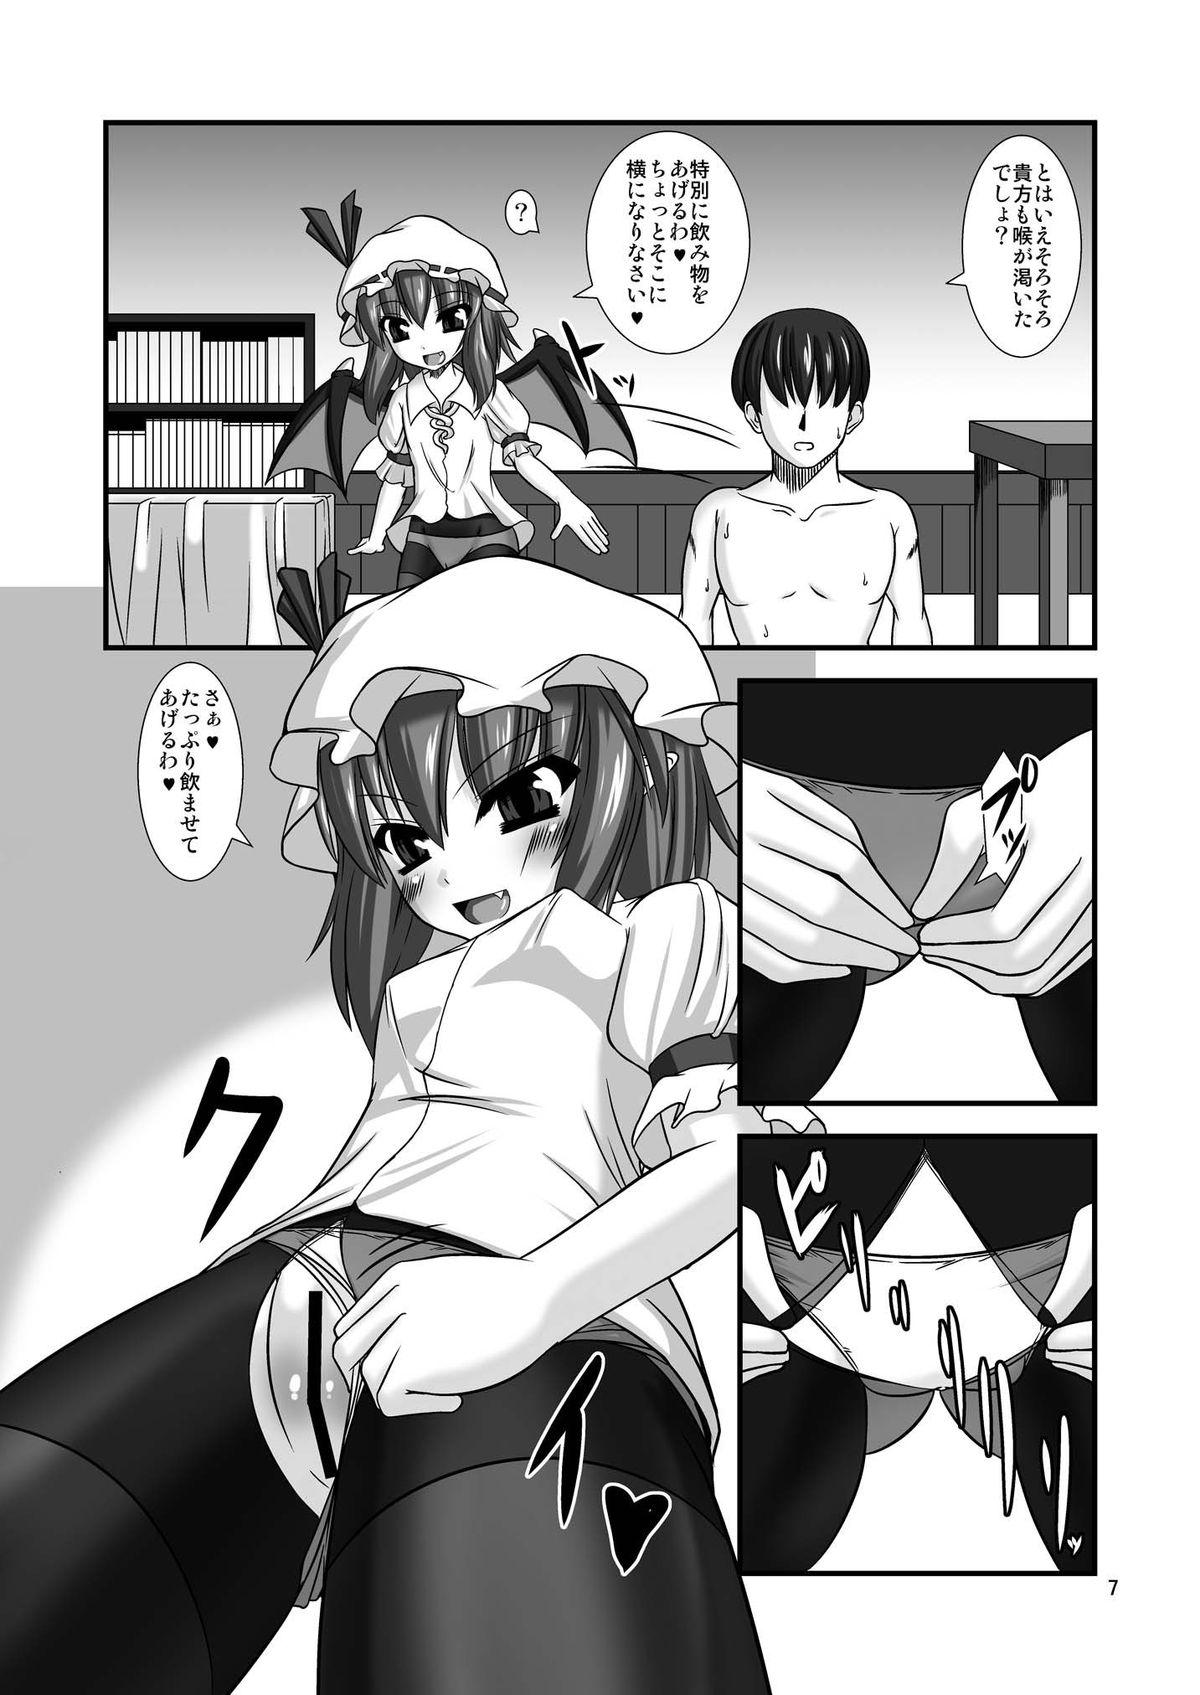 Cheating Wife 東方ドＭホイホイ～レ○リア編～２完全版 - Touhou project Gay Medic - Page 7